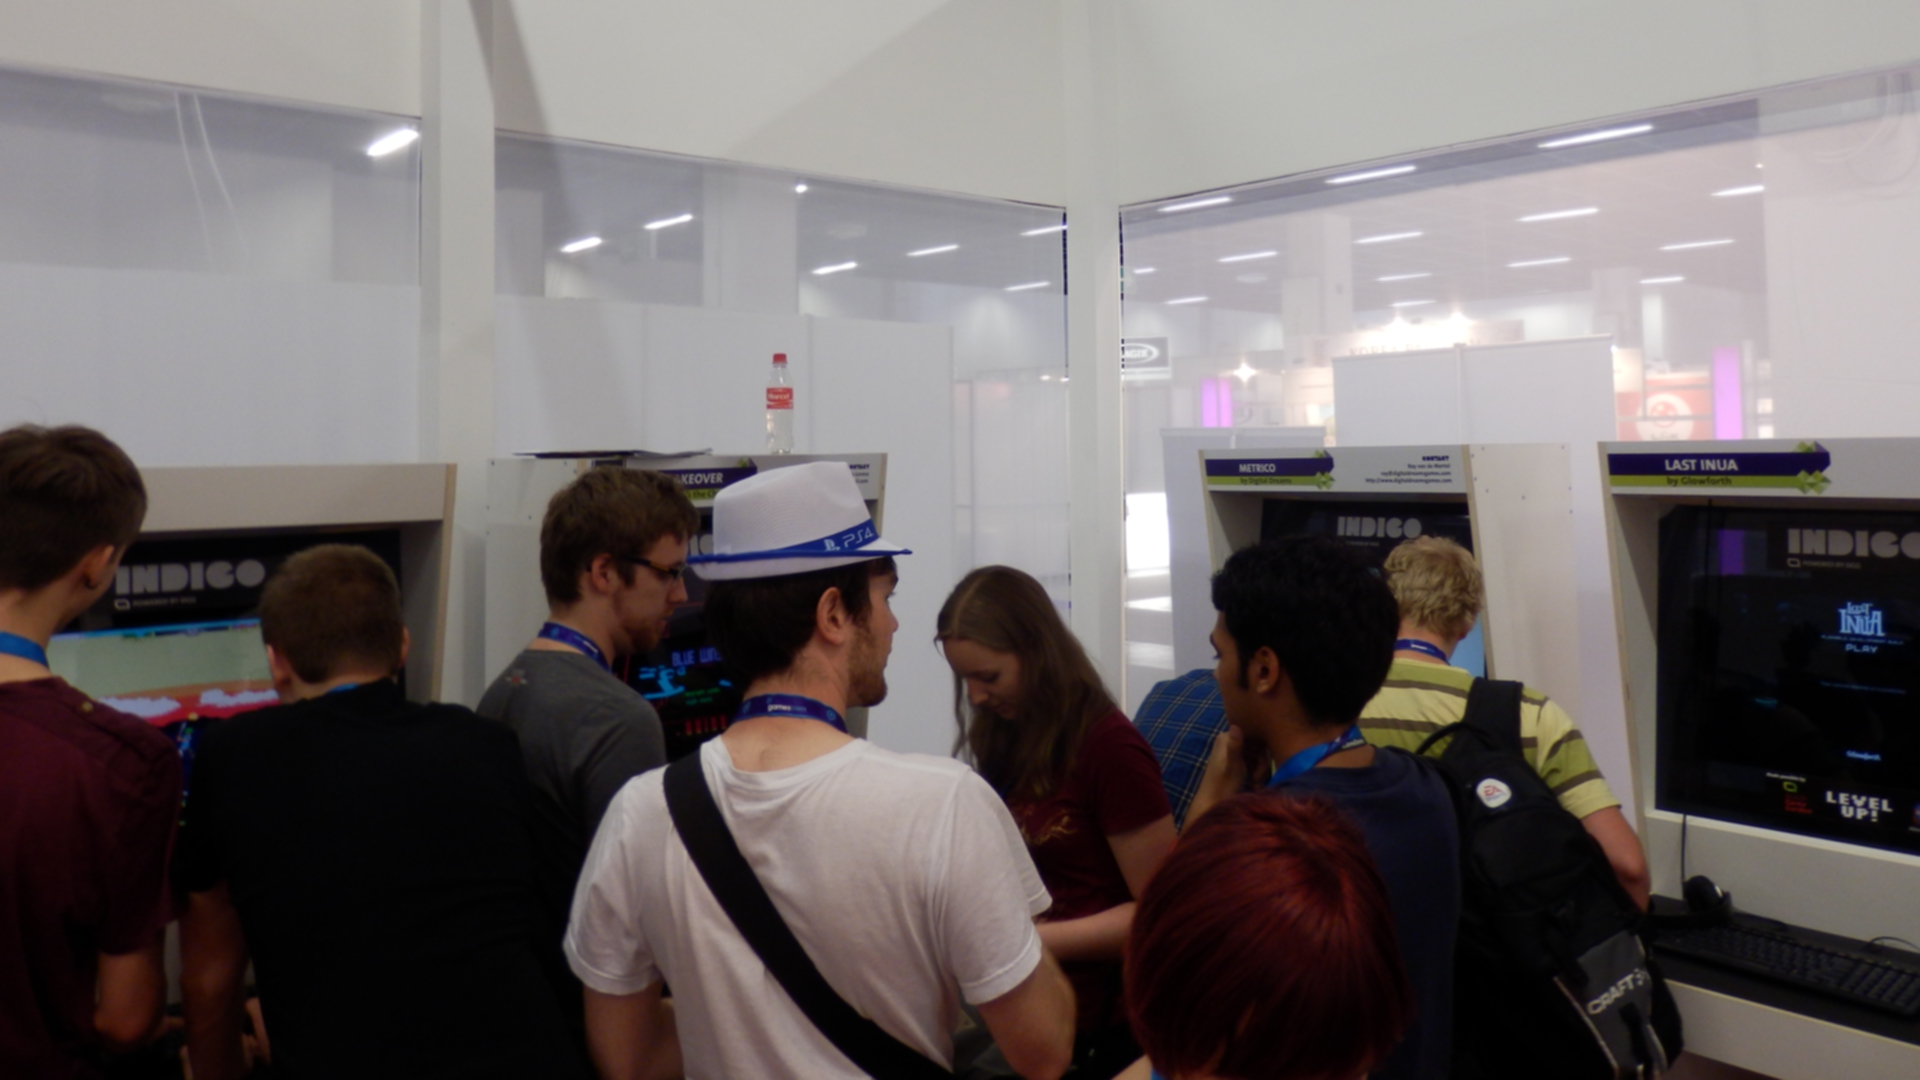 The game being played at Gamescom 2013.